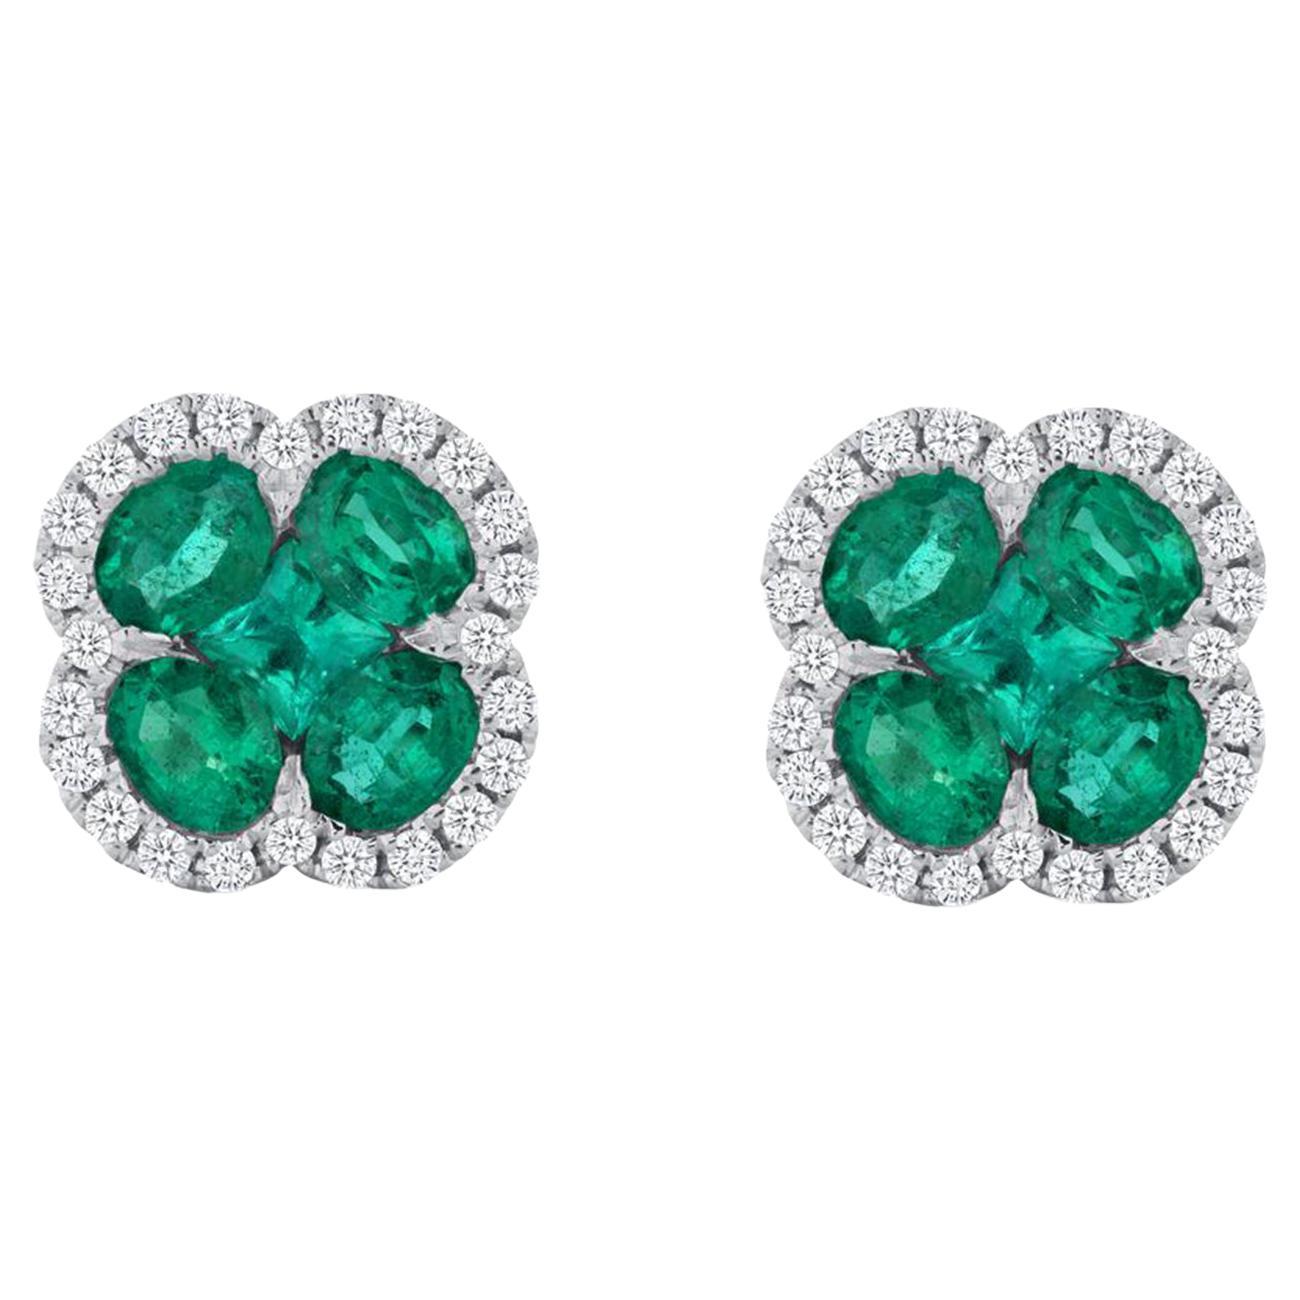 1.32 CT Natural Emerald 0.35 CT Diamonds 18K Gold Stud Four Leaf Clover Earrings